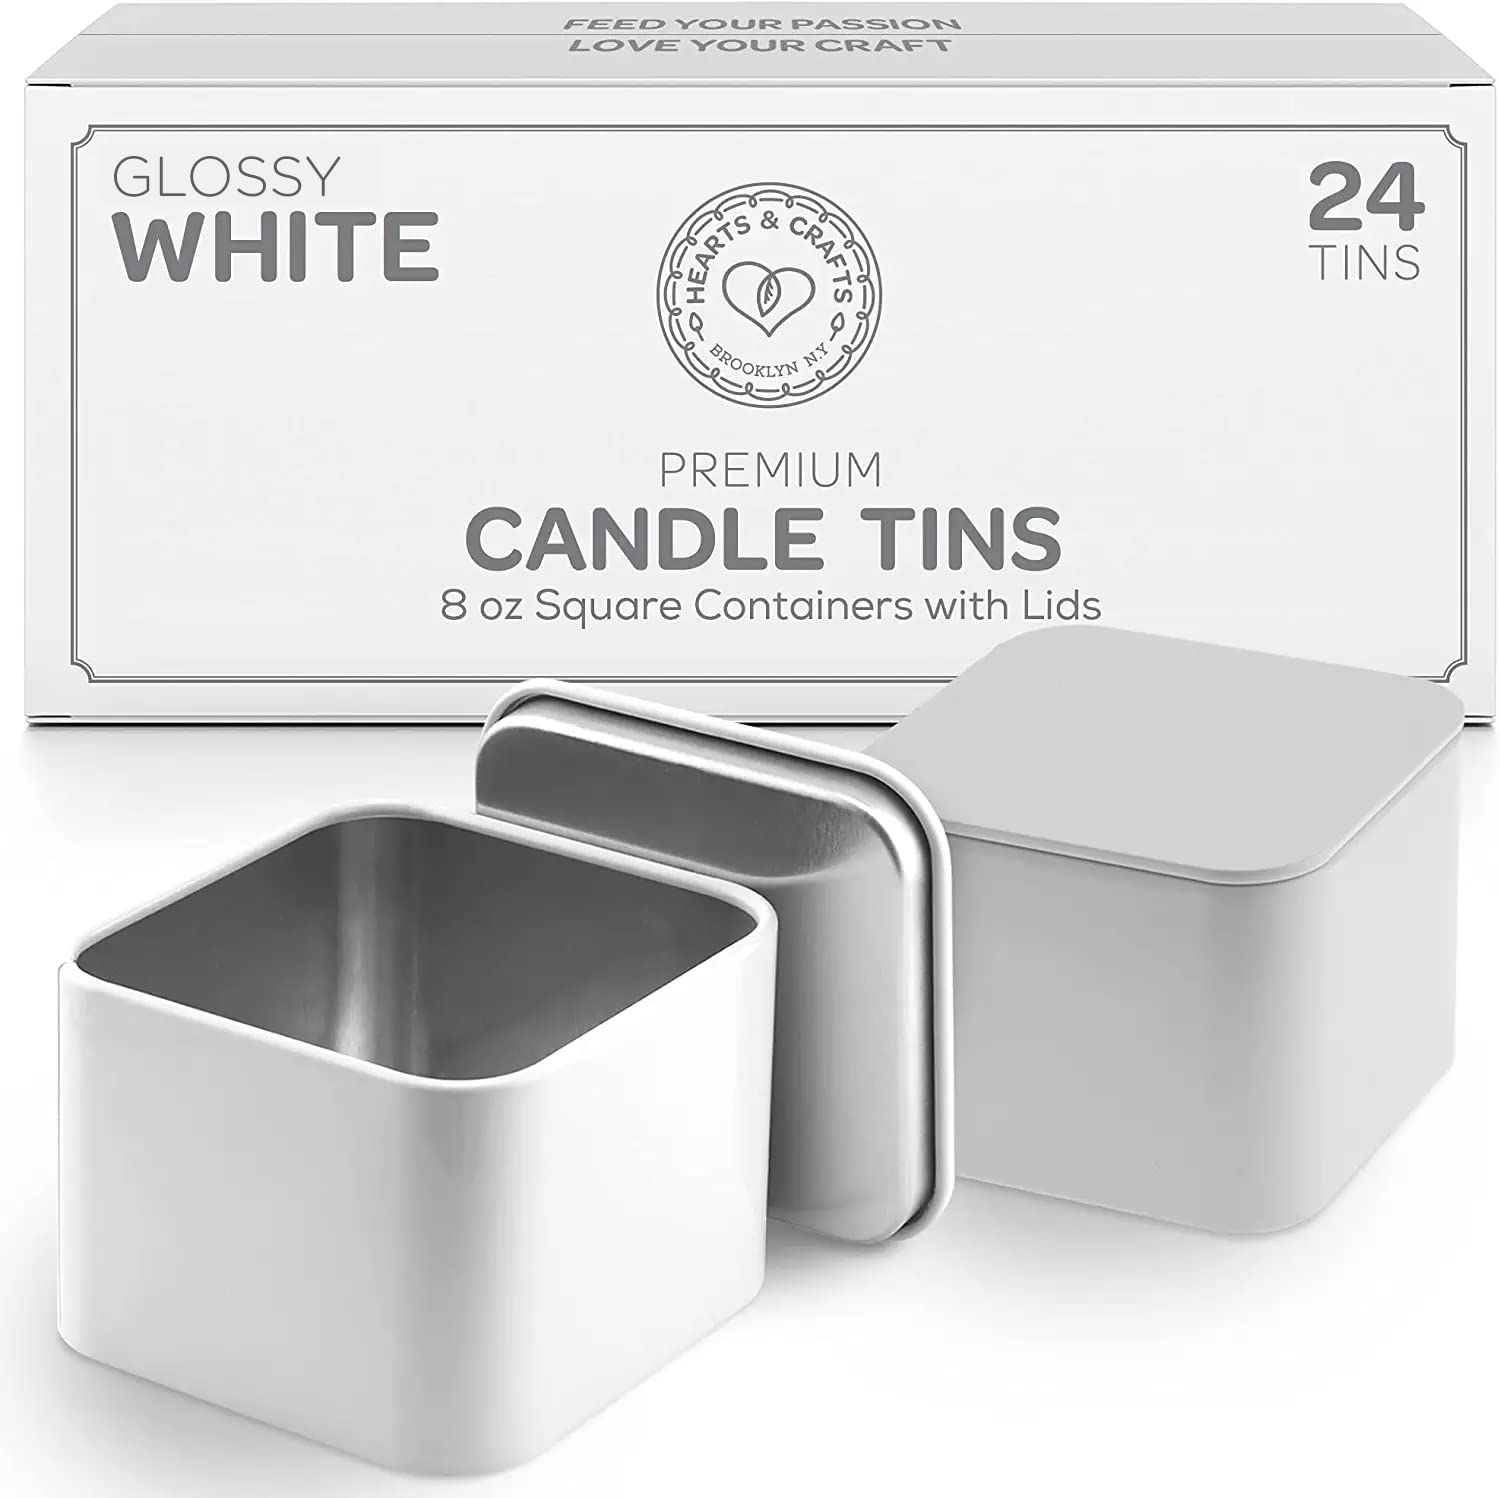 Hearts & Crafts White Square Candle Tins 8 oz with Lids - 24-Pack of Bulk Candle Jars for Making Candles, Arts & Crafts, Storage, Gifts, and More - Empty Candle Jars with Lids  - Like New